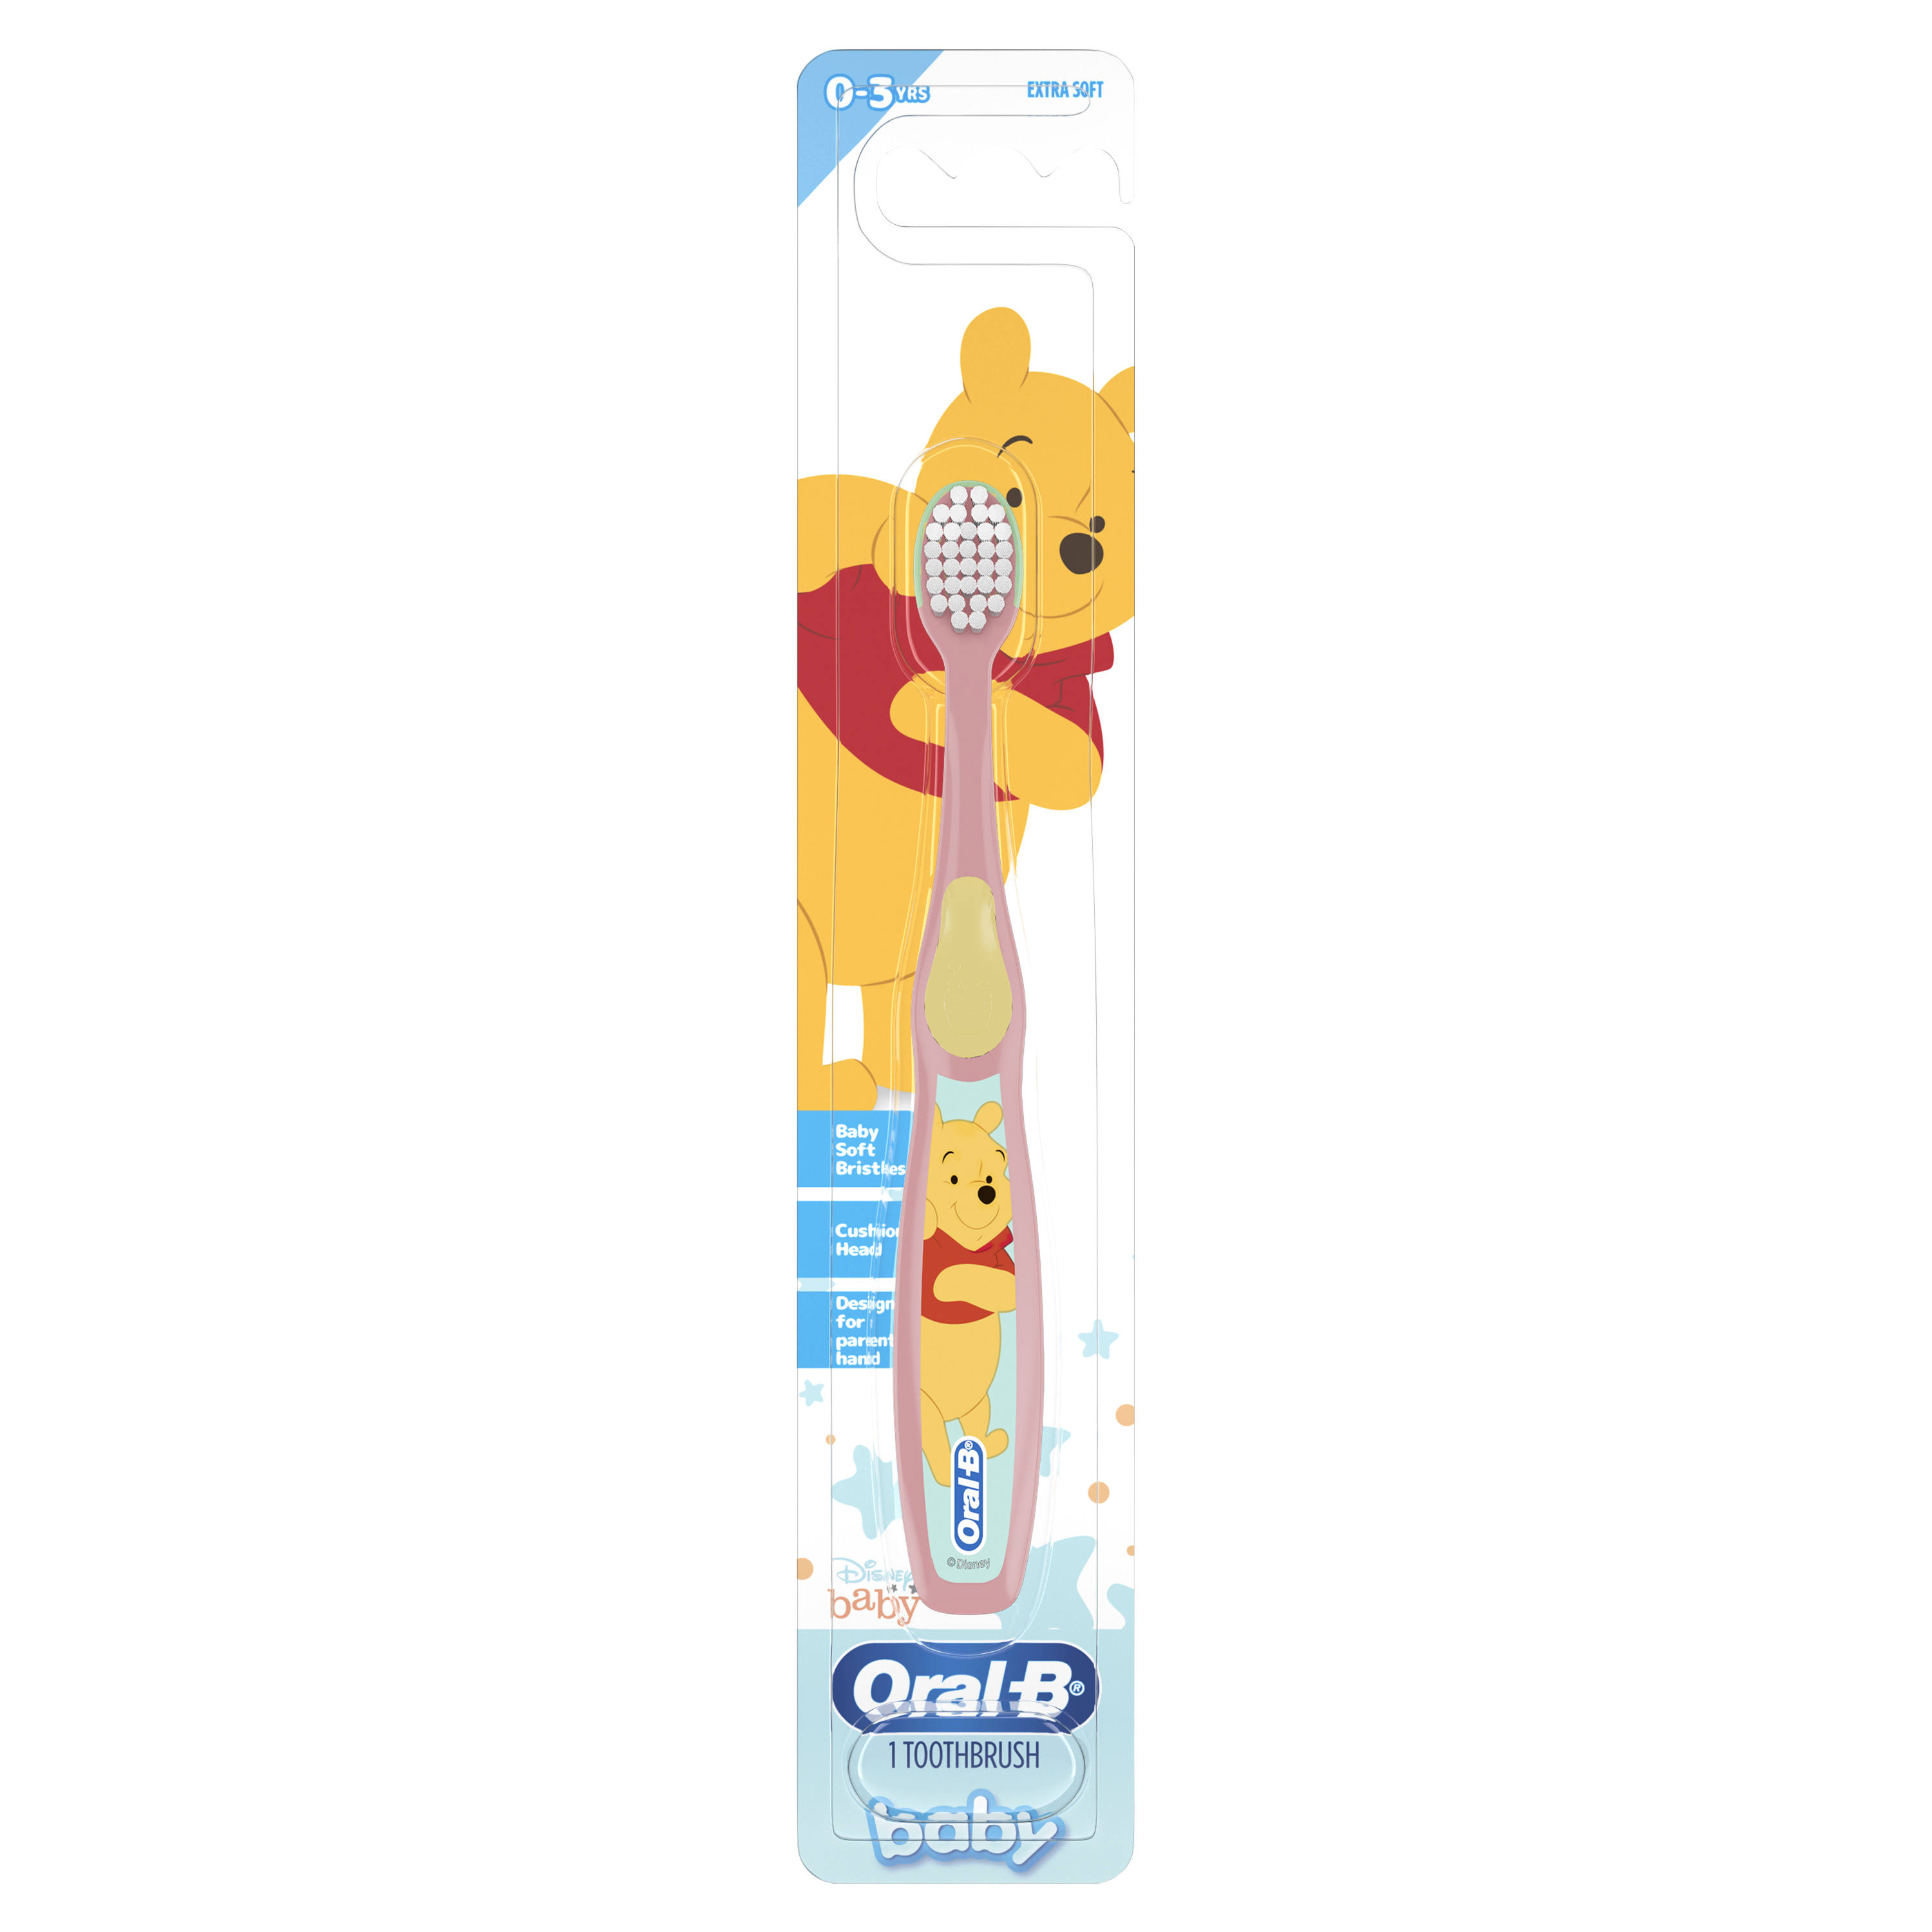 Oral-B Baby Toothbrush Featuring Disney's Pooh, Baby Soft Bristles,